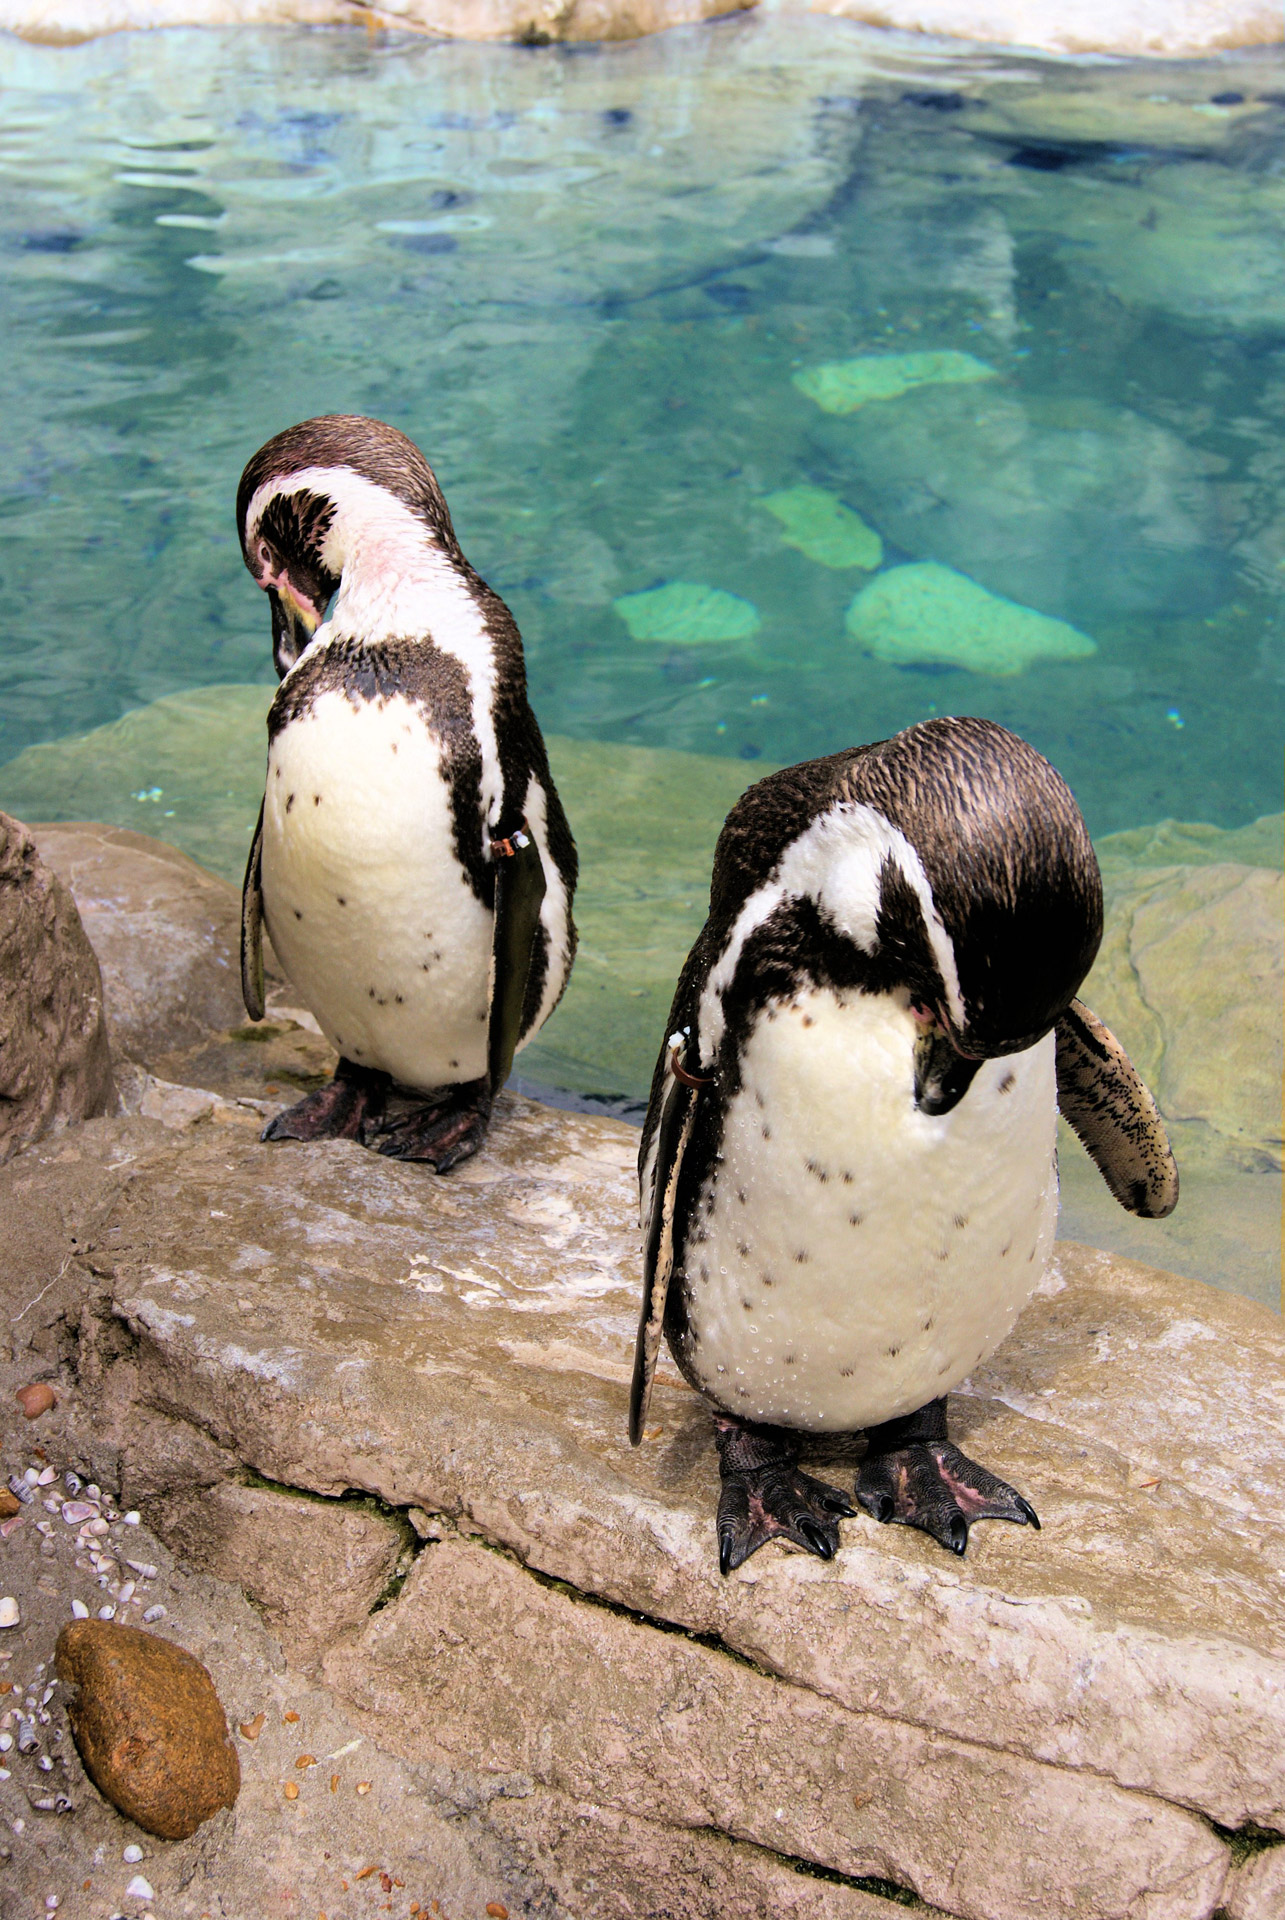 File:Two penguins at St Louis www.bagssaleusa.com - Wikimedia Commons